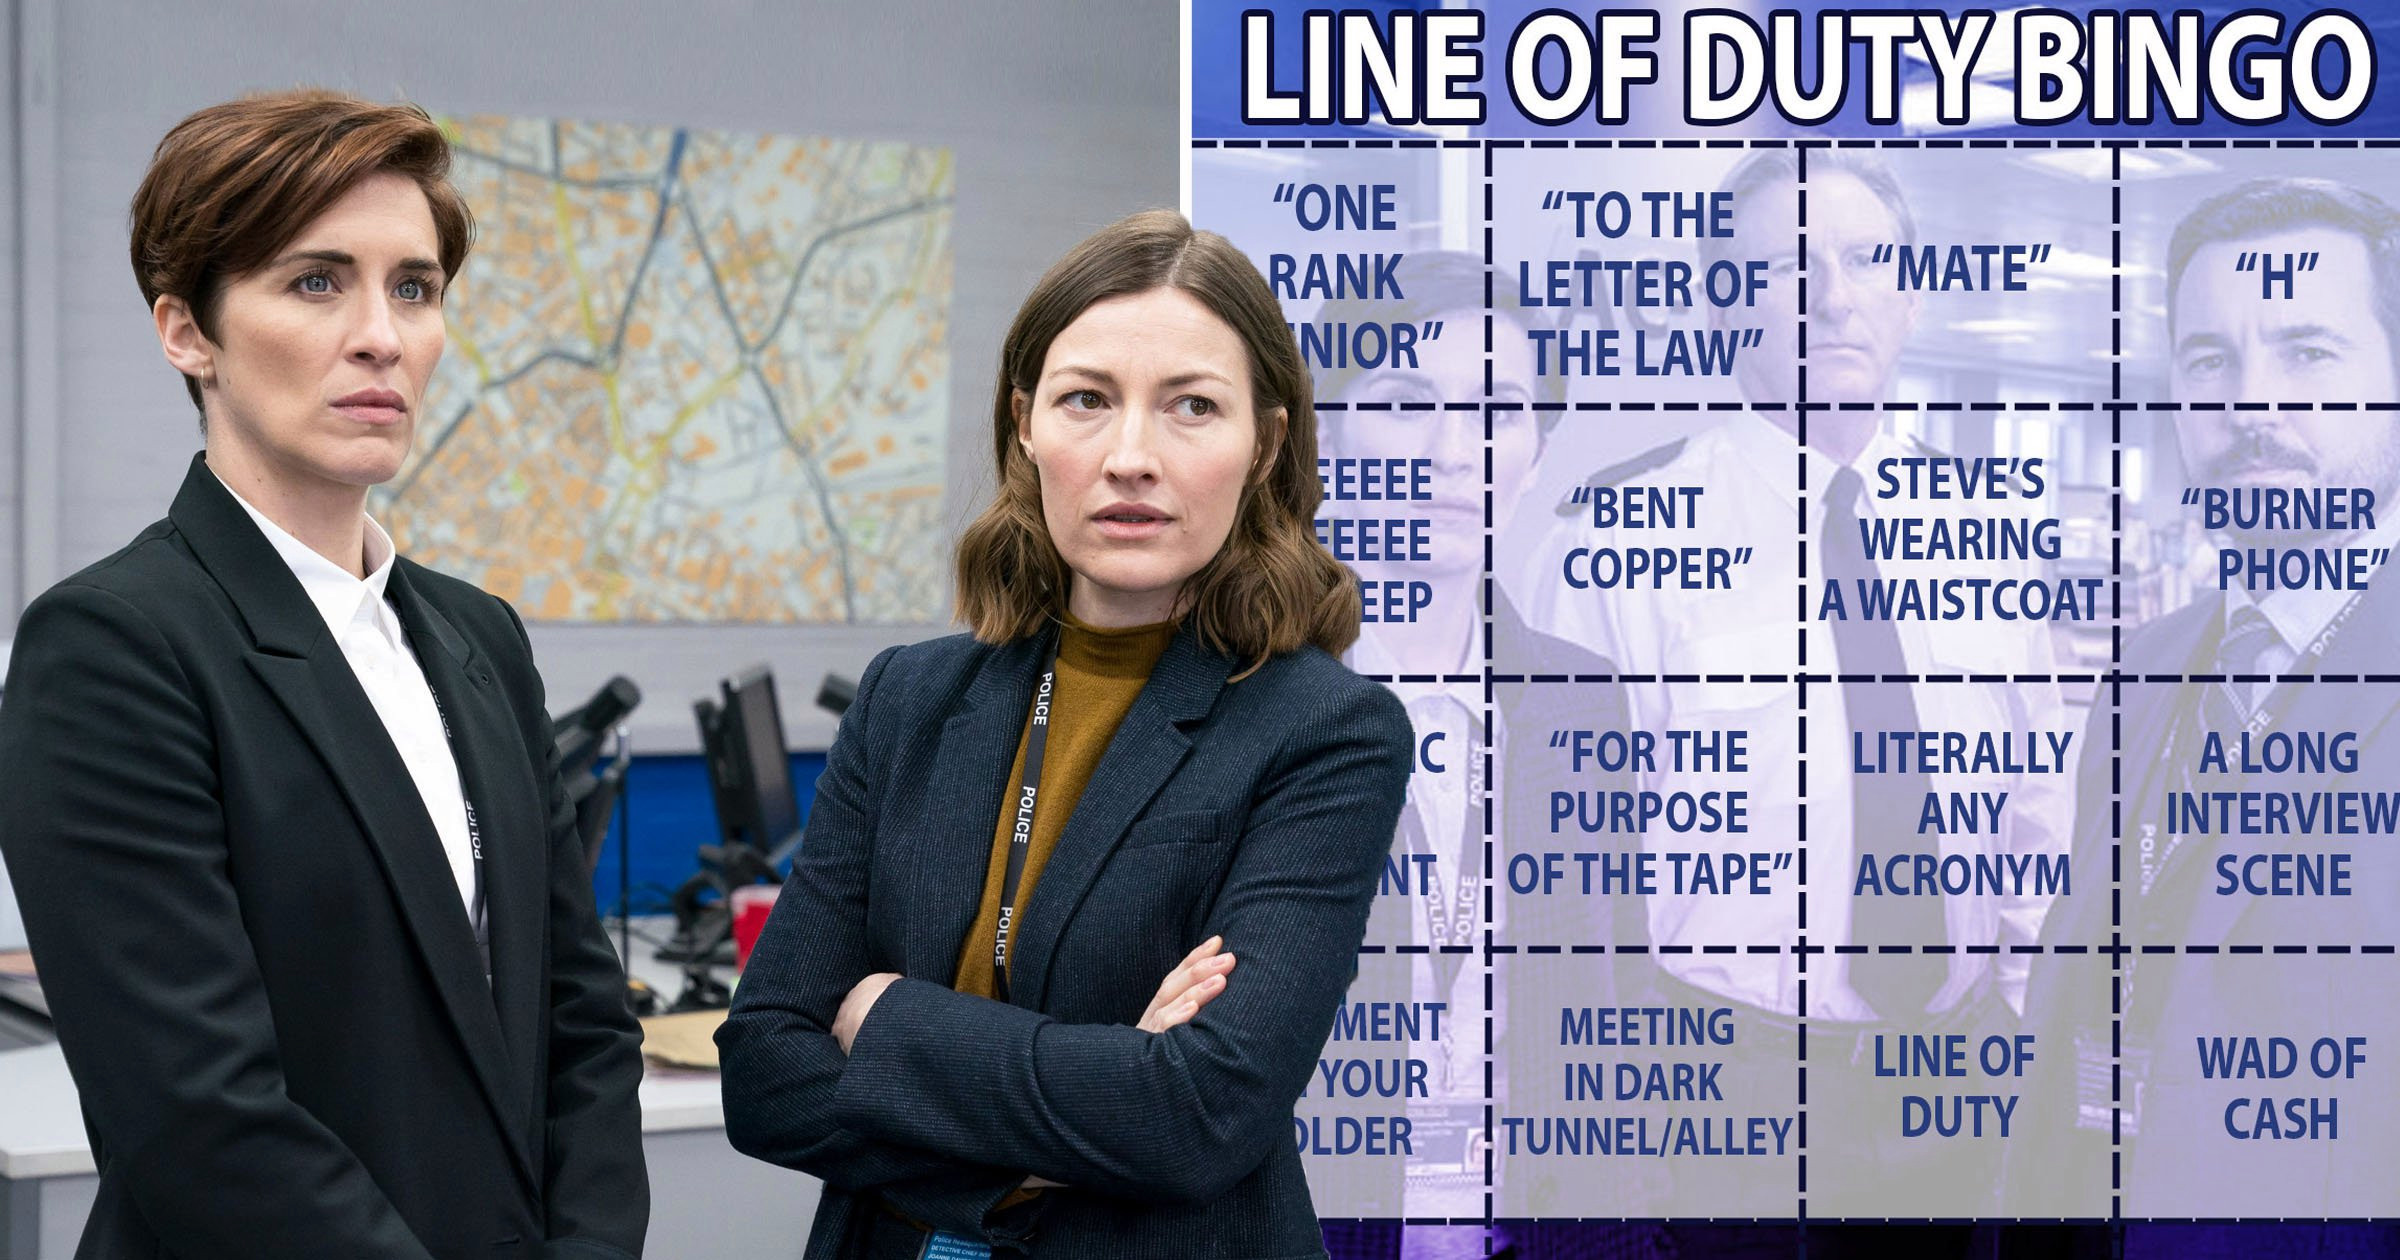 Line of Duty series 6: How to play bingo based on iconic quotes from Ted Hastings and co